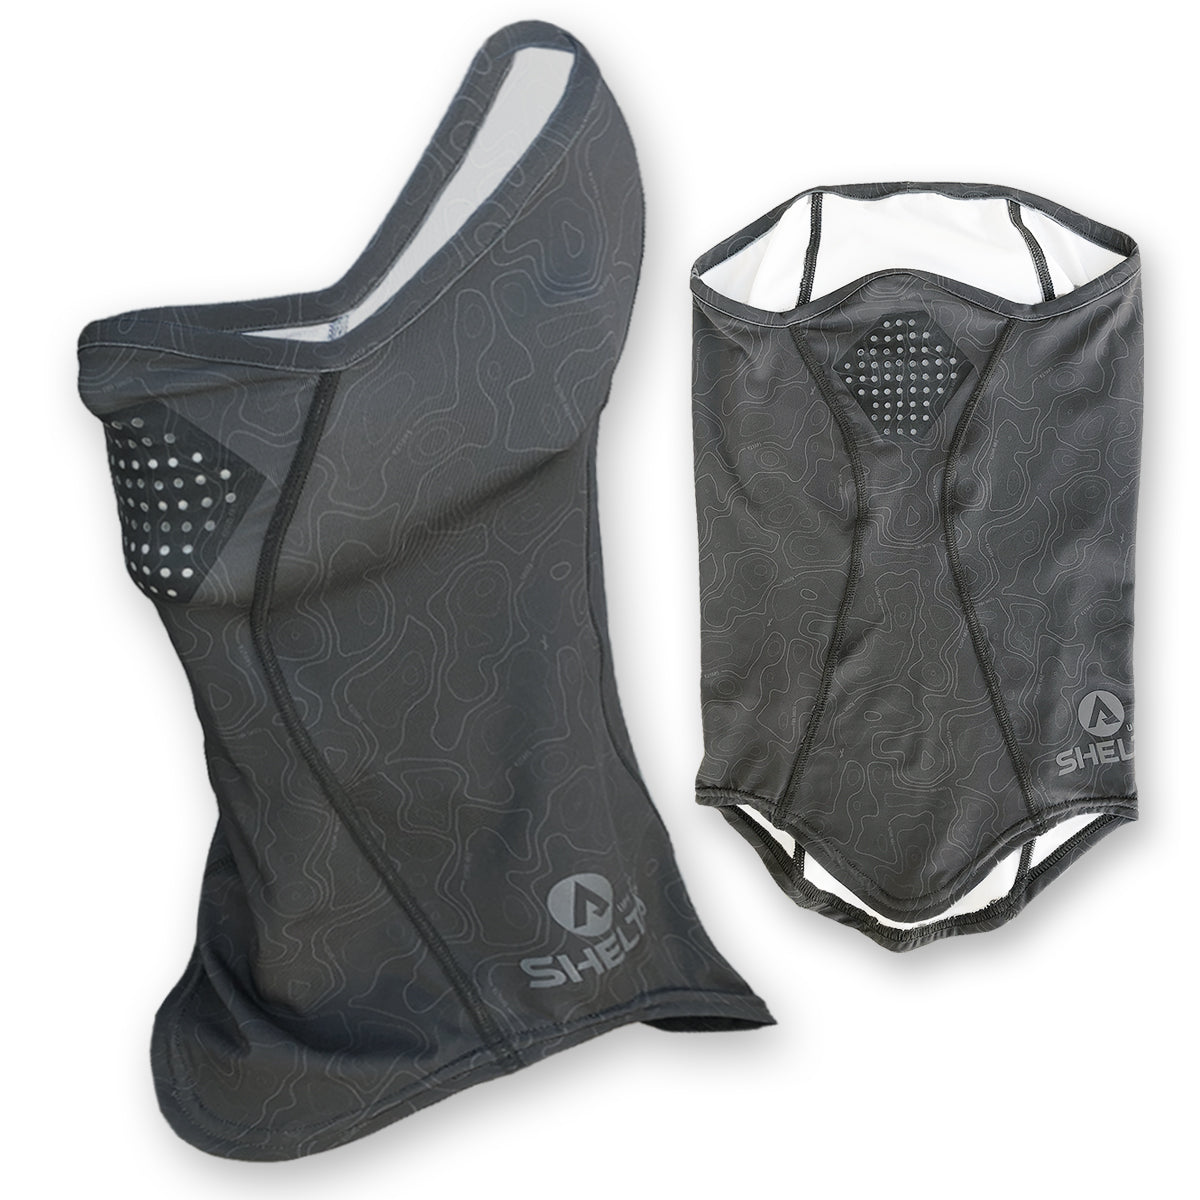 Our Face Gaiter in the granite terrain color protects your face and neck from harmful UV rays. Sun protection that won’t wear off, it allows you to spend the whole day on the water or in the field without burning. Made from lightweight, moisture wicking stretch fabric, our gaiter features silicone coated laser-cut breathing holes.  The breathable fabric offers UPF 50+ UV protection and covers the top of your nose down to your neckline with enough height in the back to fit over a cap or under your sunhat.